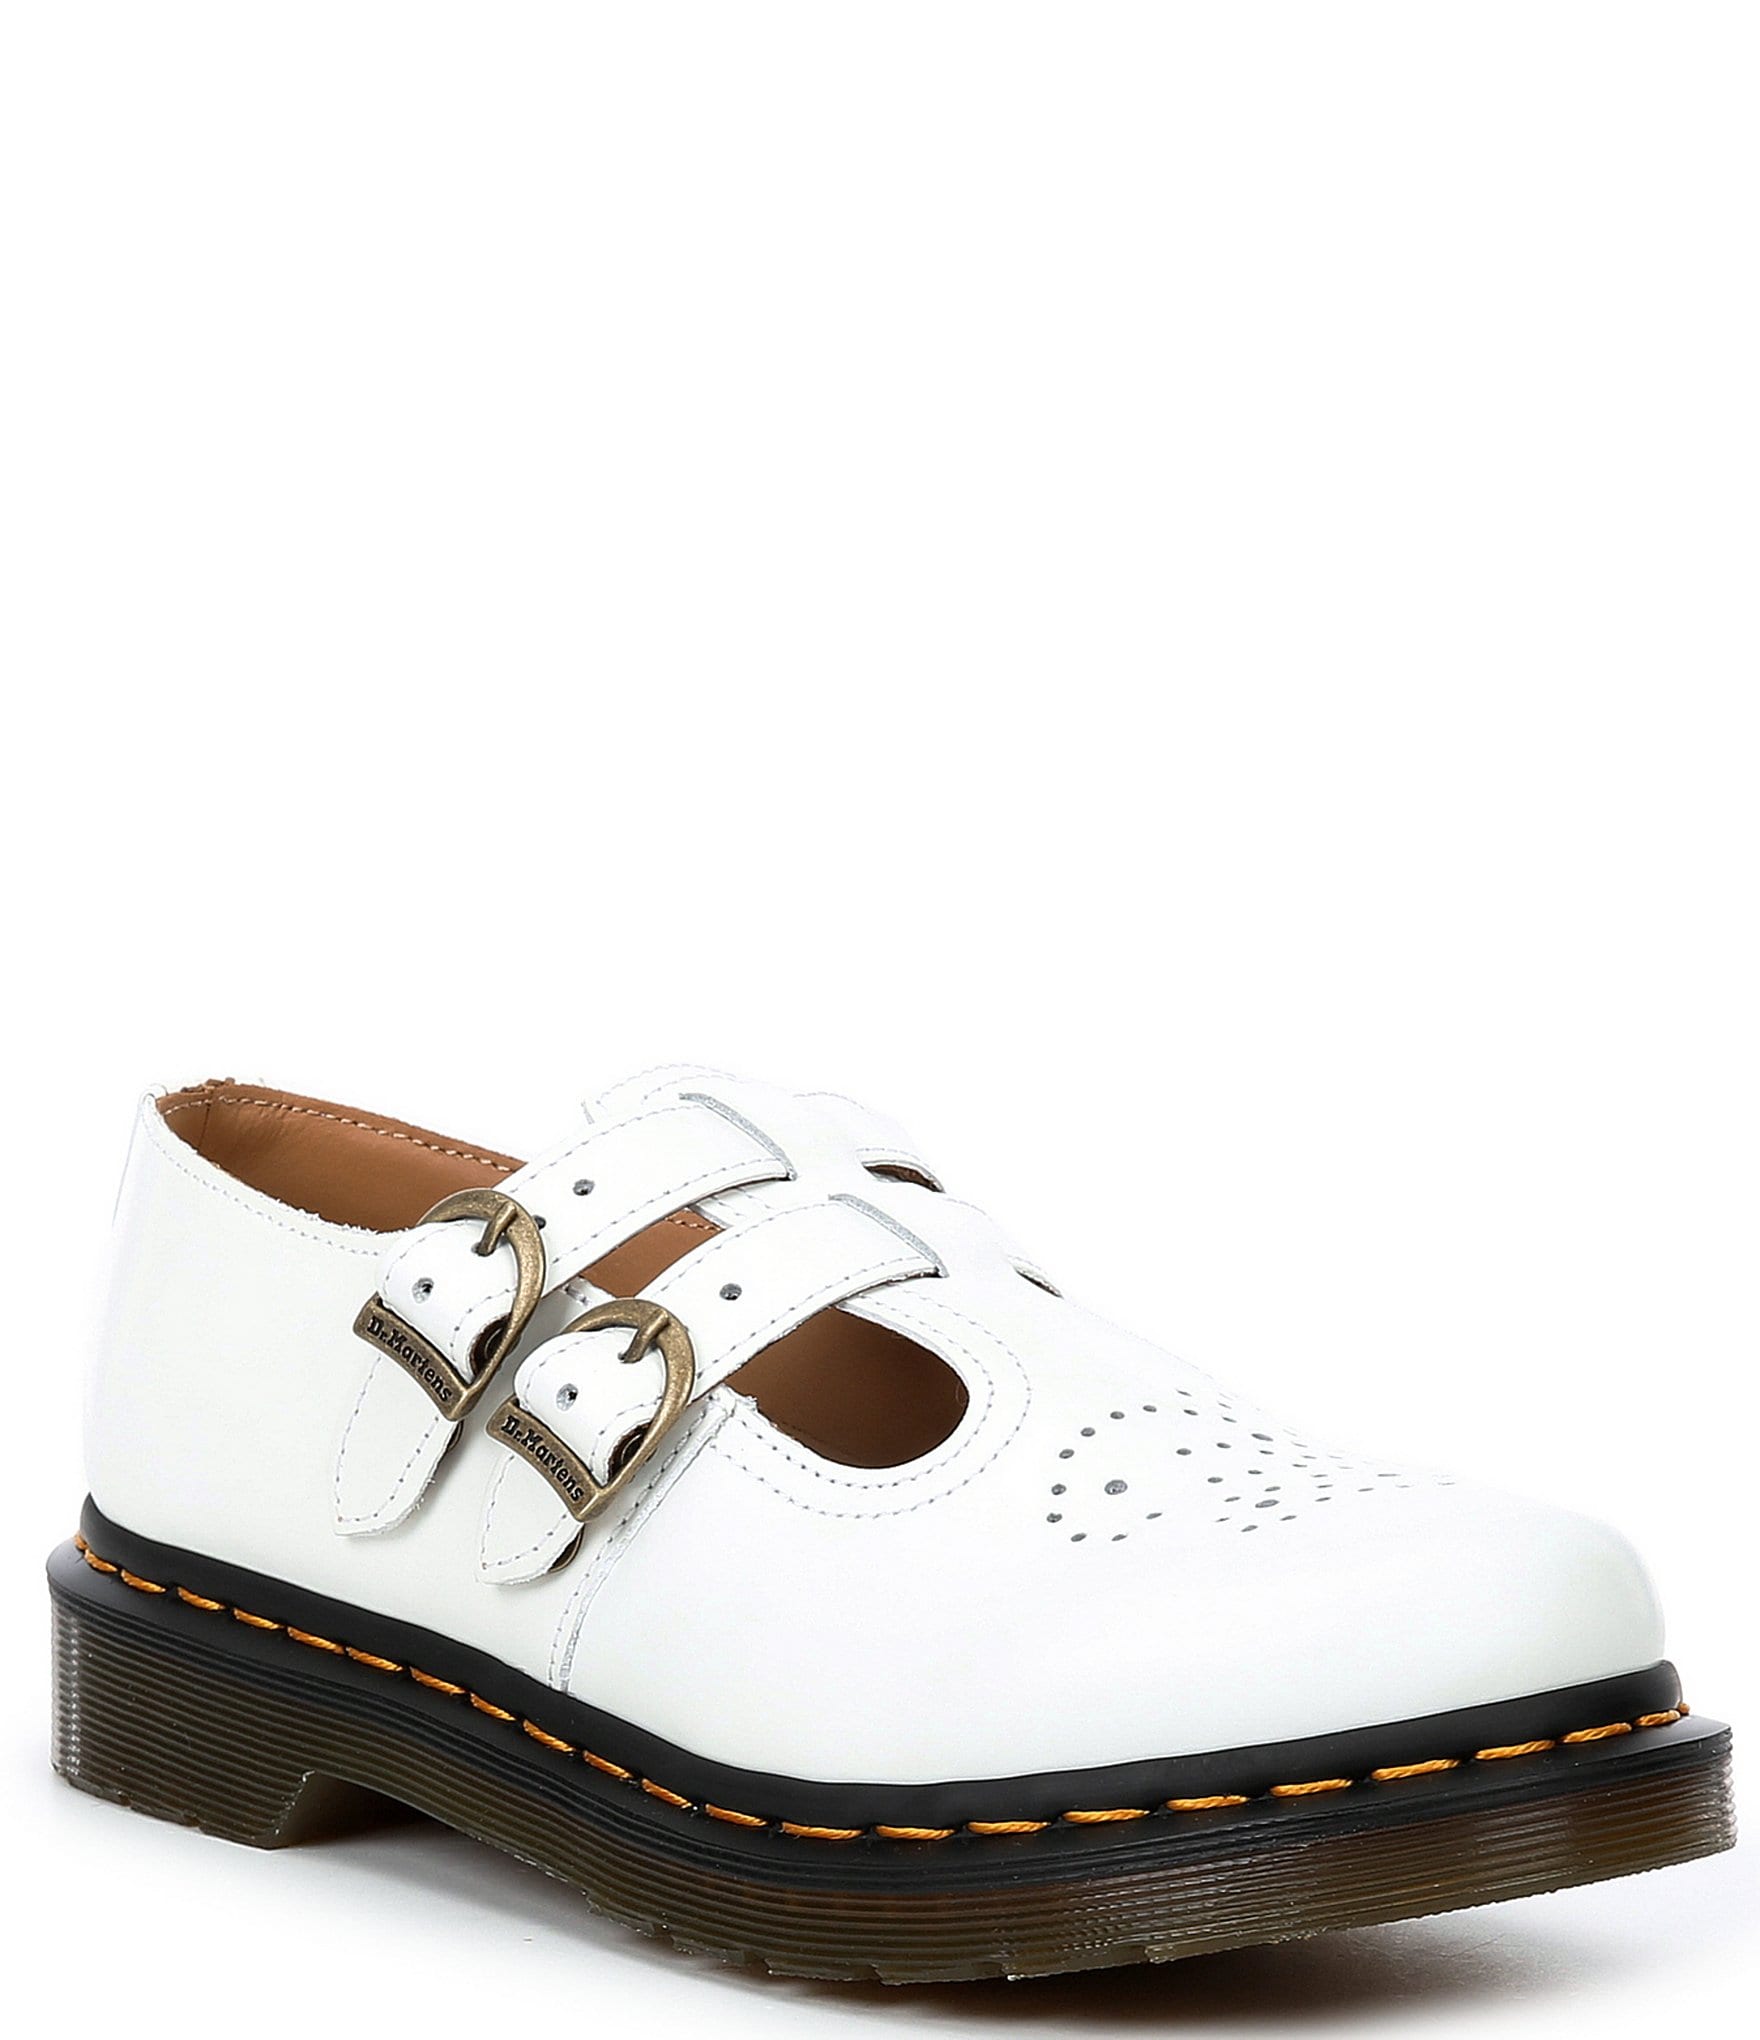 Martens Womens 8065 Mary Jane Dr 